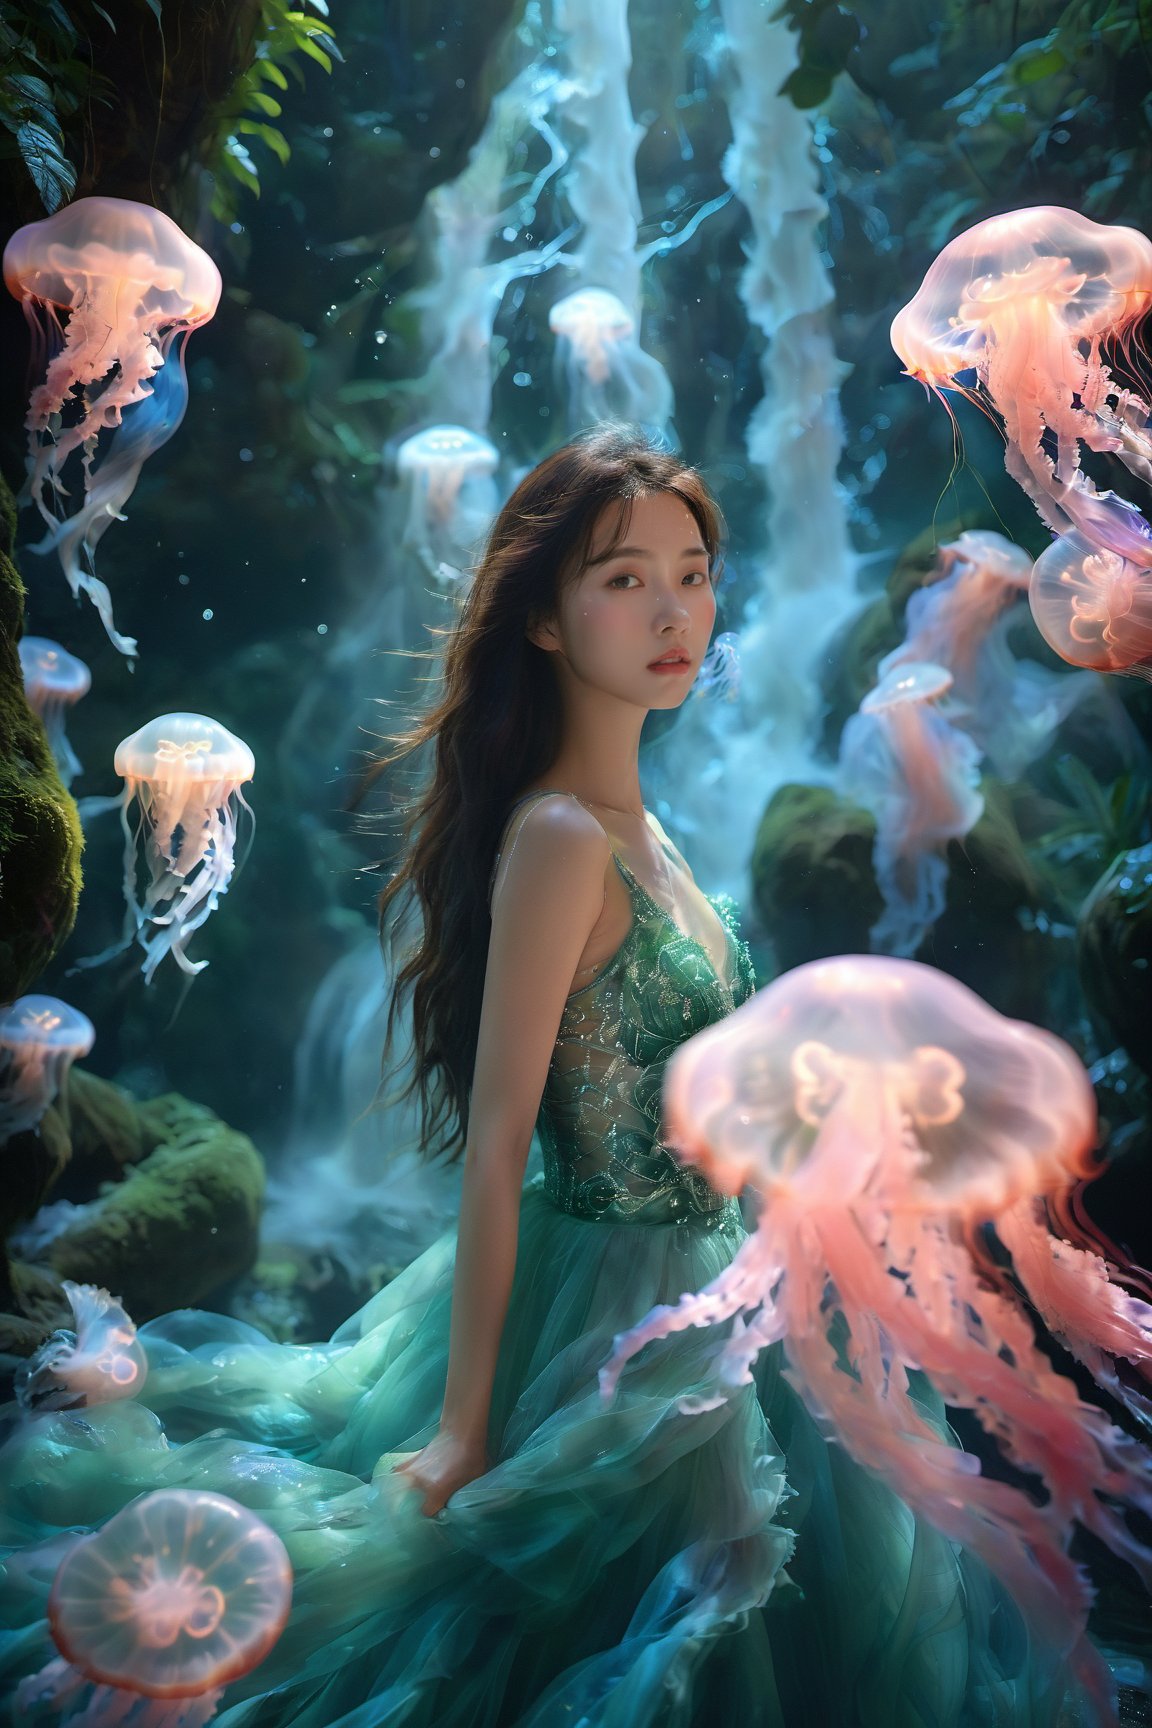 An Asian young woman with long flowing hair, adorned in a delicate emerald green gown, surrounded by a mesmerizing rainforest waterfall environment. She stands amidst a dance of luminescent jellyfish, which glow in hues of pink and blue. The backdrop is a cascading waterfall, punctuated by the soft glow of bioluminescent plants and the gentle mist of water. The woman's gaze is distant, as if lost in thought, while the jellyfish float gracefully around her, creating an ethereal and dreamlike atmosphere.